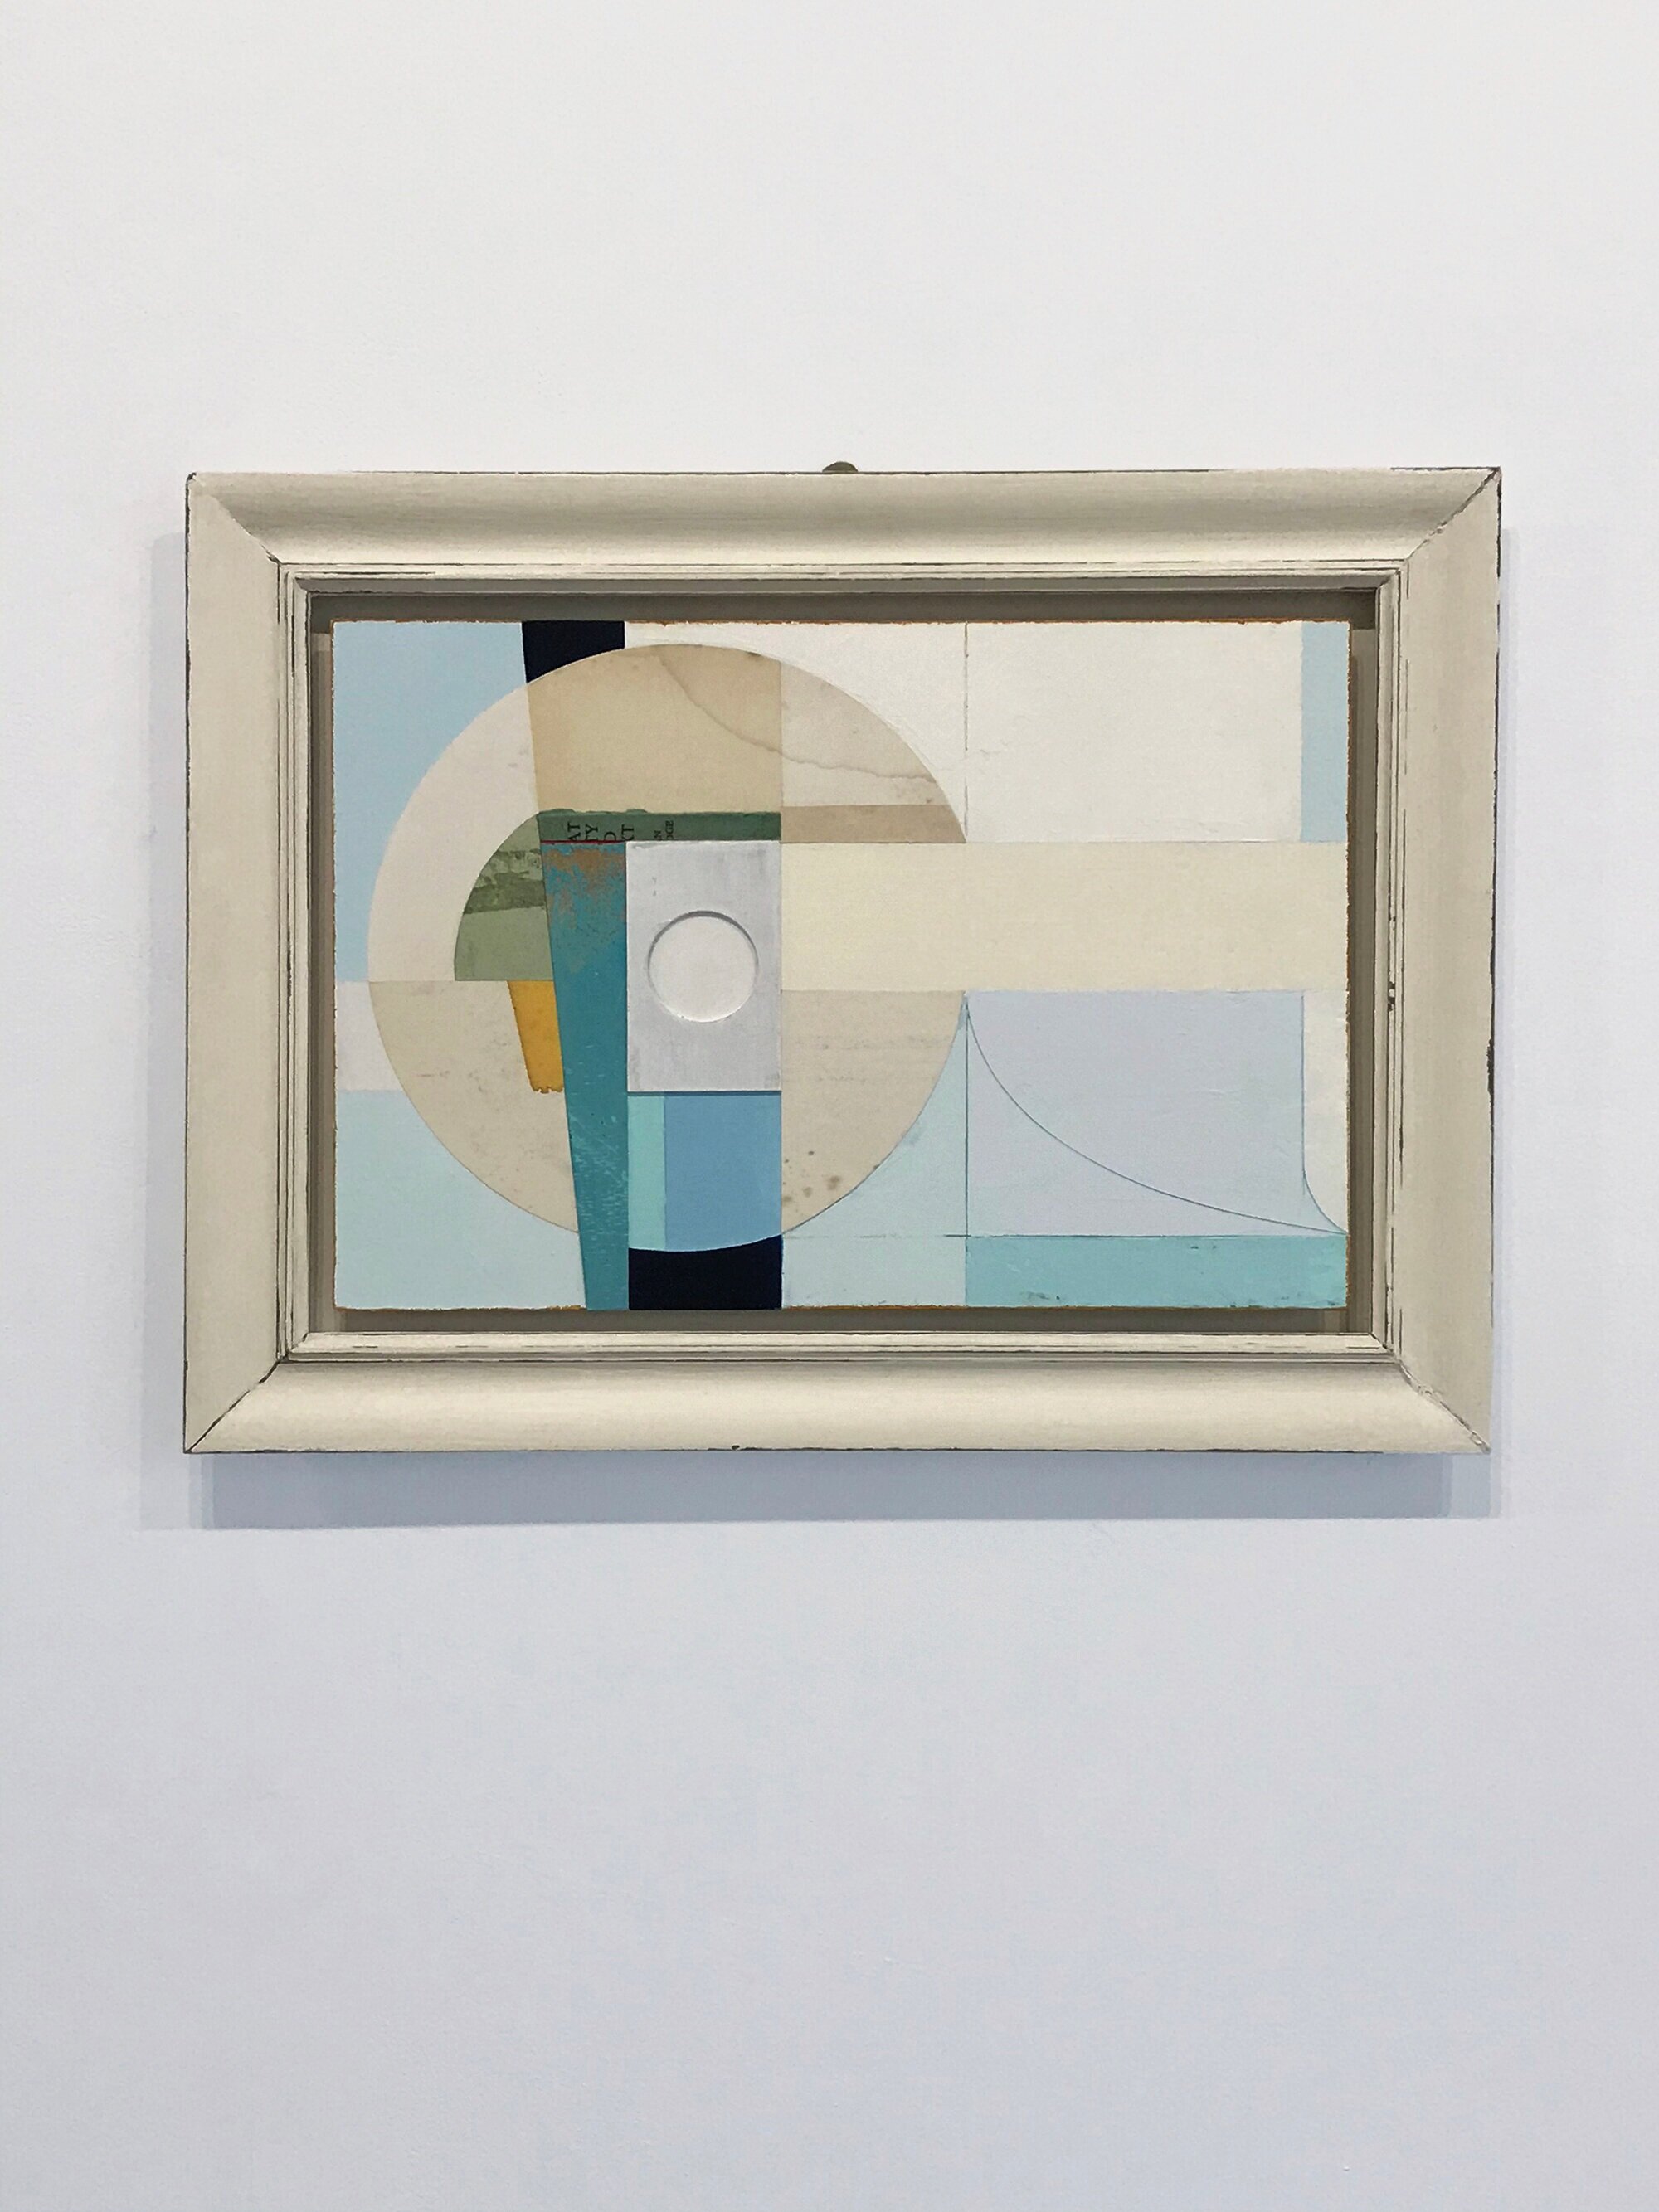 Steven Heaton, 'All Circles Vanish' 2020, 39x53cm including frame, oil and collage on wood.